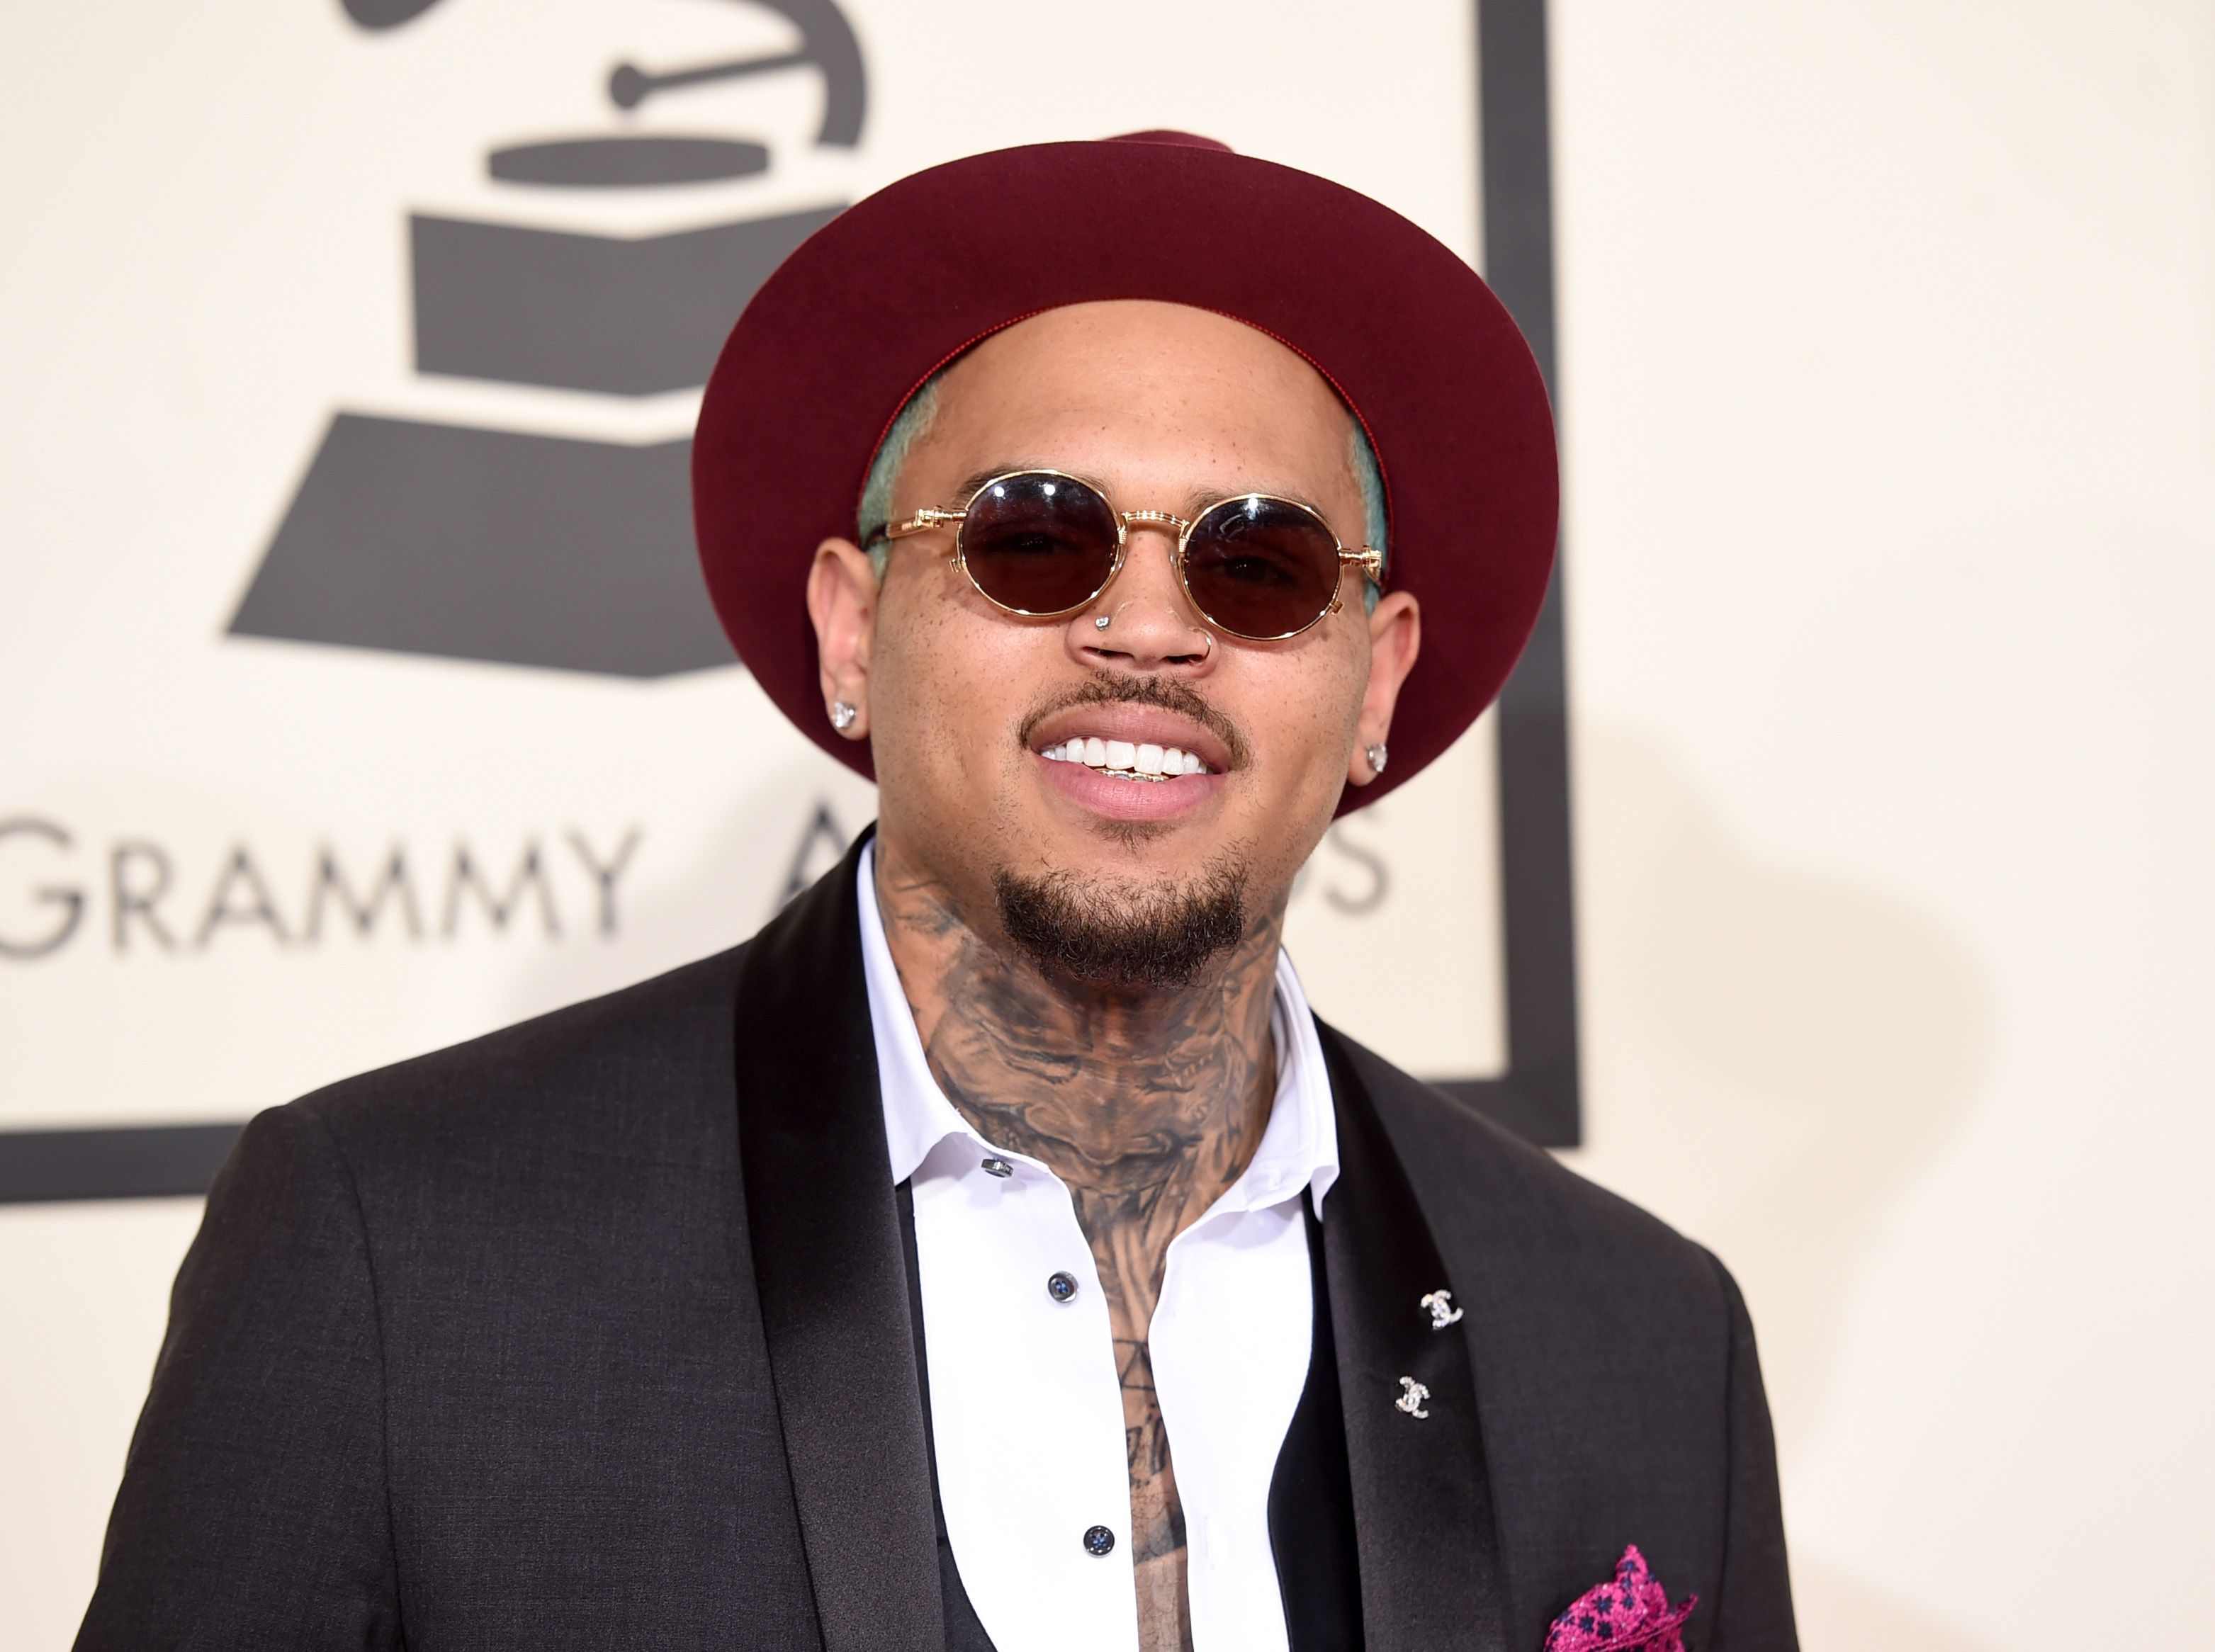 Chris Brown at The 57th Annual Grammy Awards at the Staples Center on February 8, 2015 | Photo: Getty Images